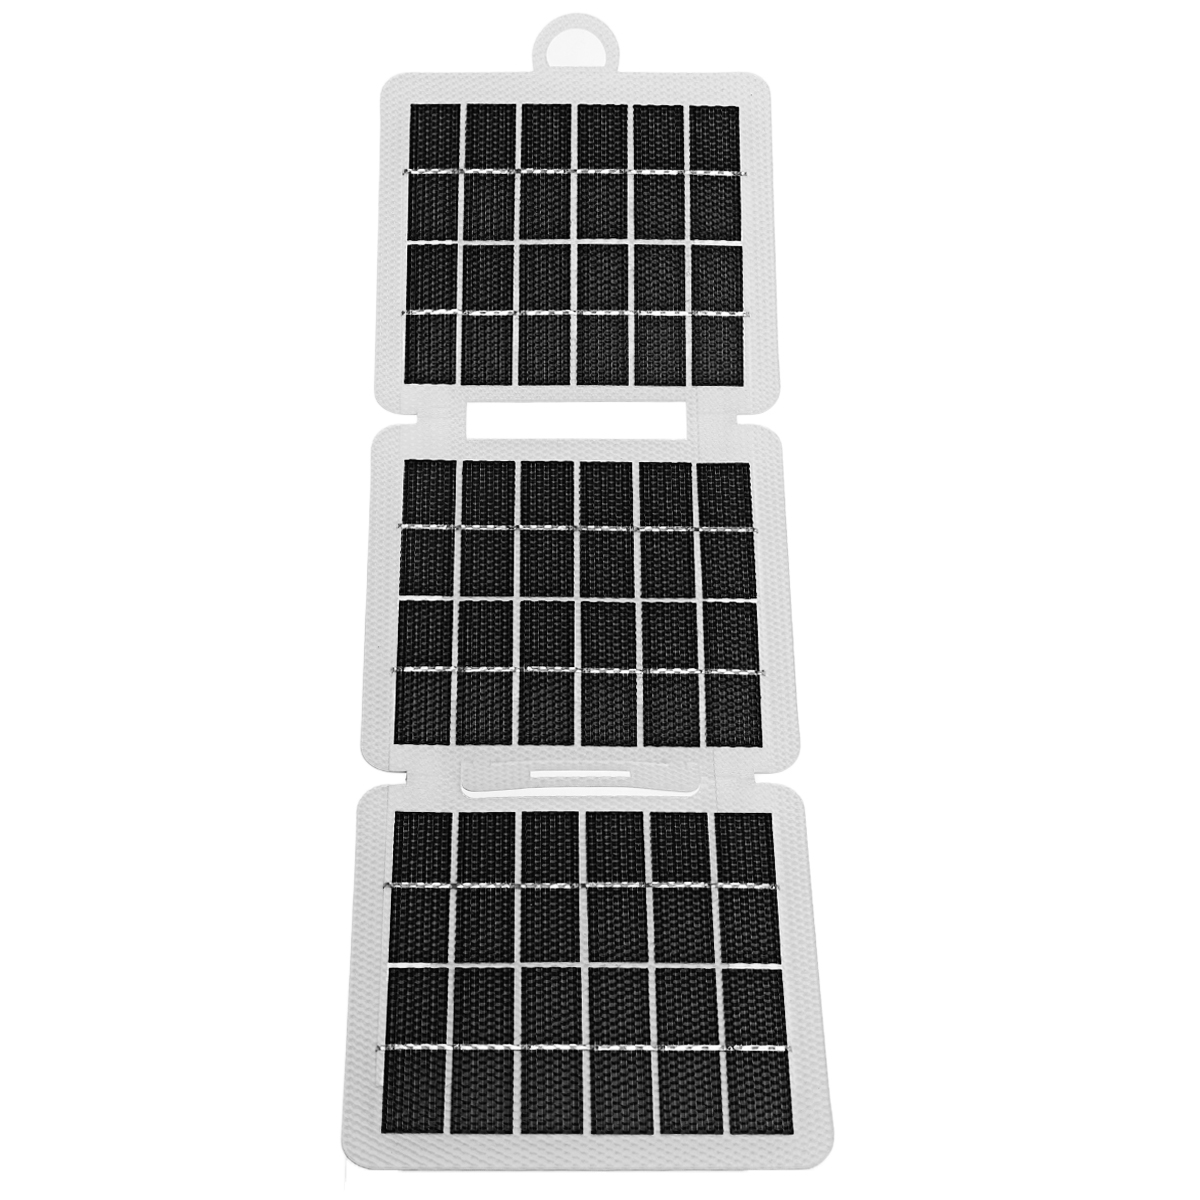 7W-Foldable-Solar-Panel-USB-Output-Port-Portable-Monocrystalline-Charging-Panel-Outdoor-Camping-Emer-1900305-7